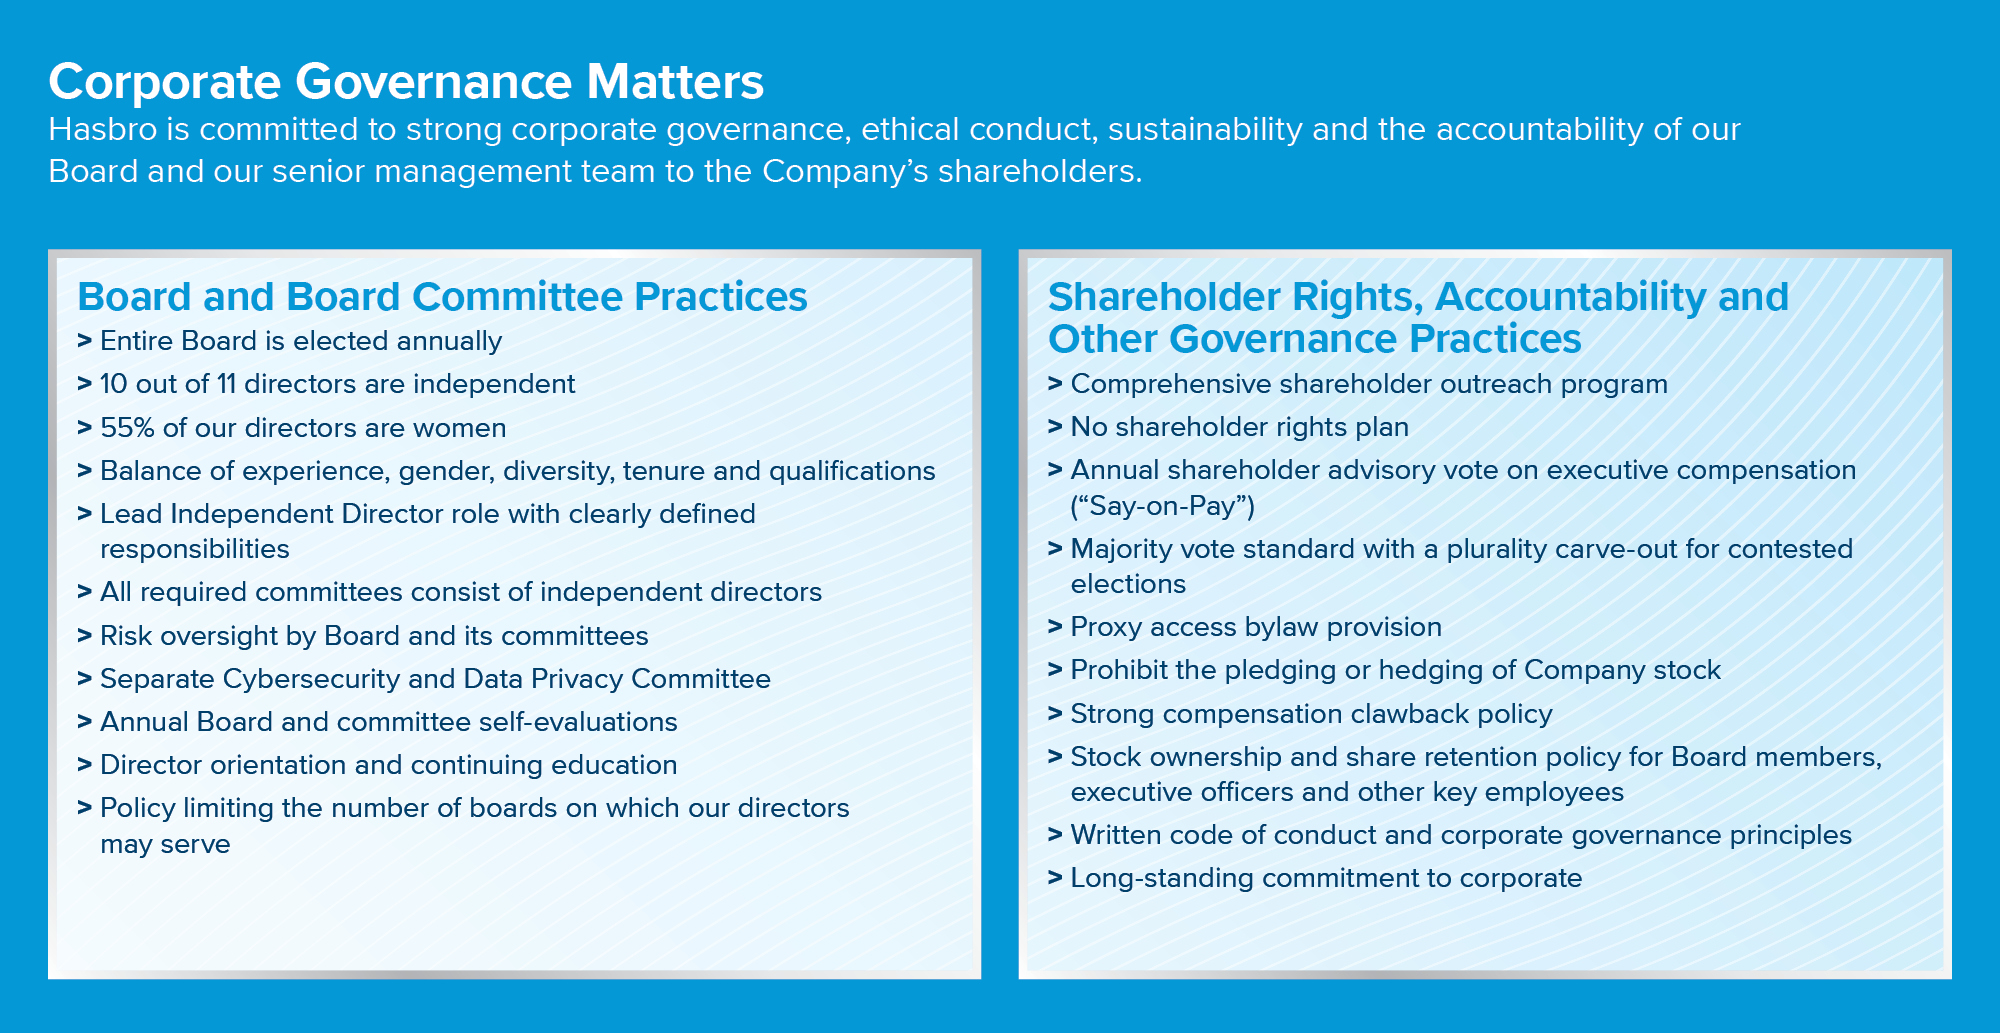 Corporate Governance Matters image 1